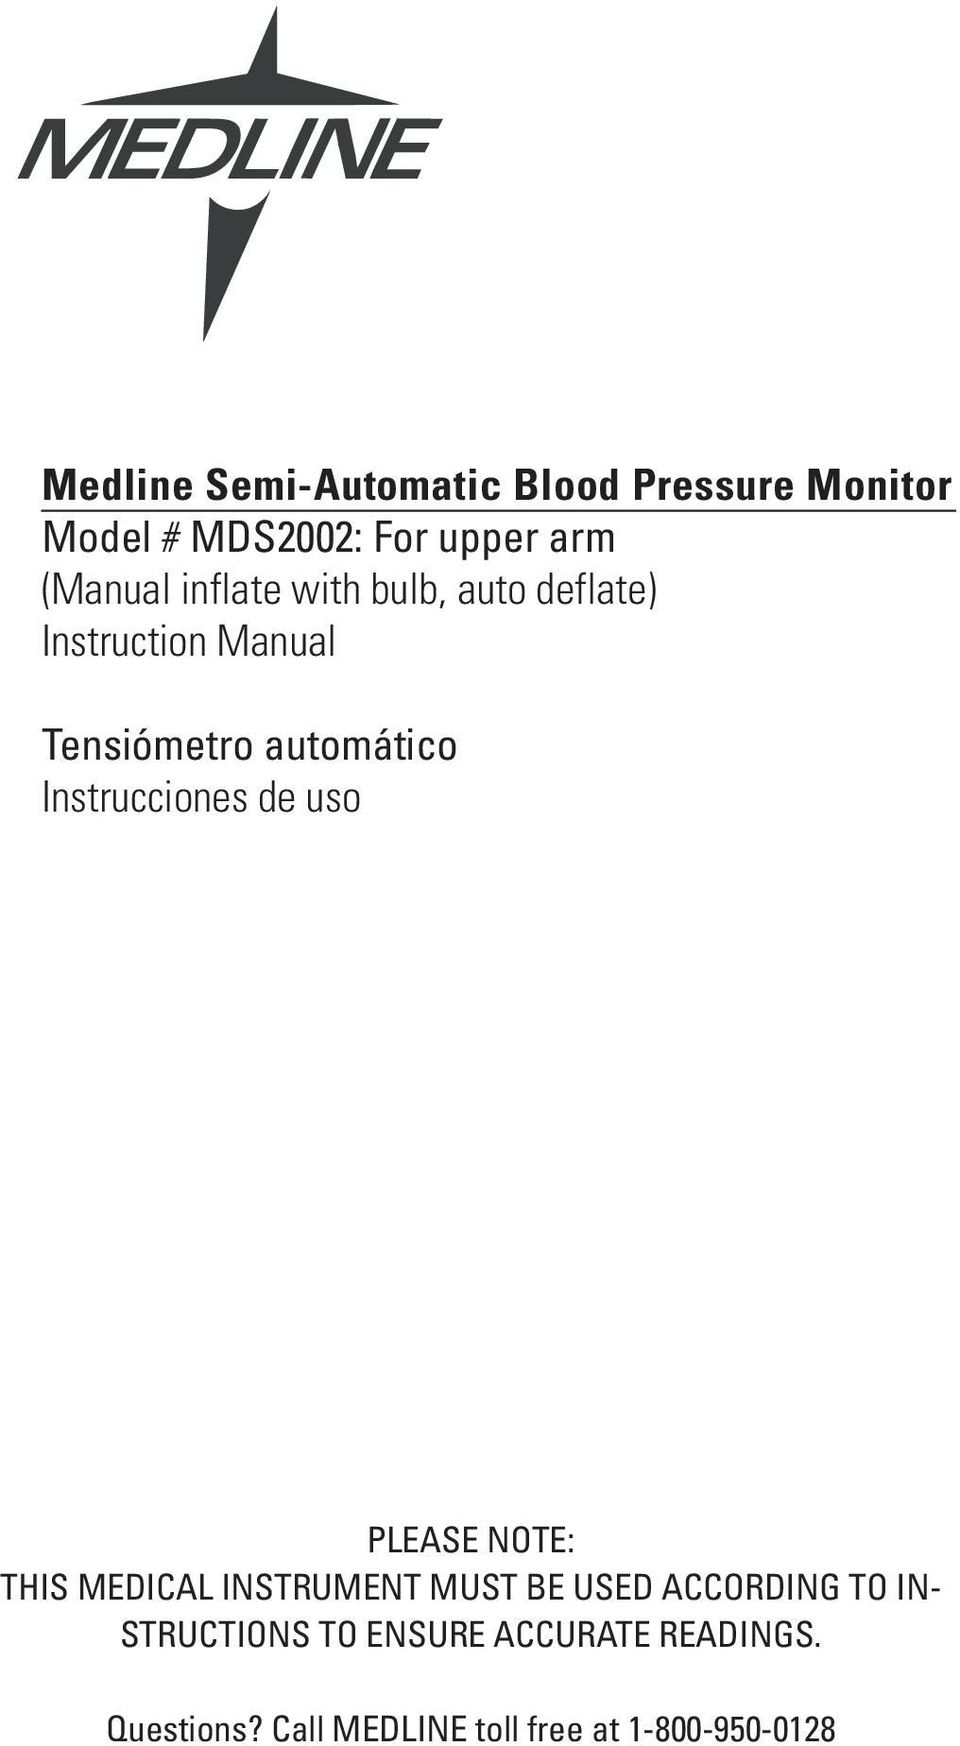 Instrucciones de uso PLEASE NOTE: THIS MEDICAL INSTRUMENT MUST BE USED ACCORDING TO